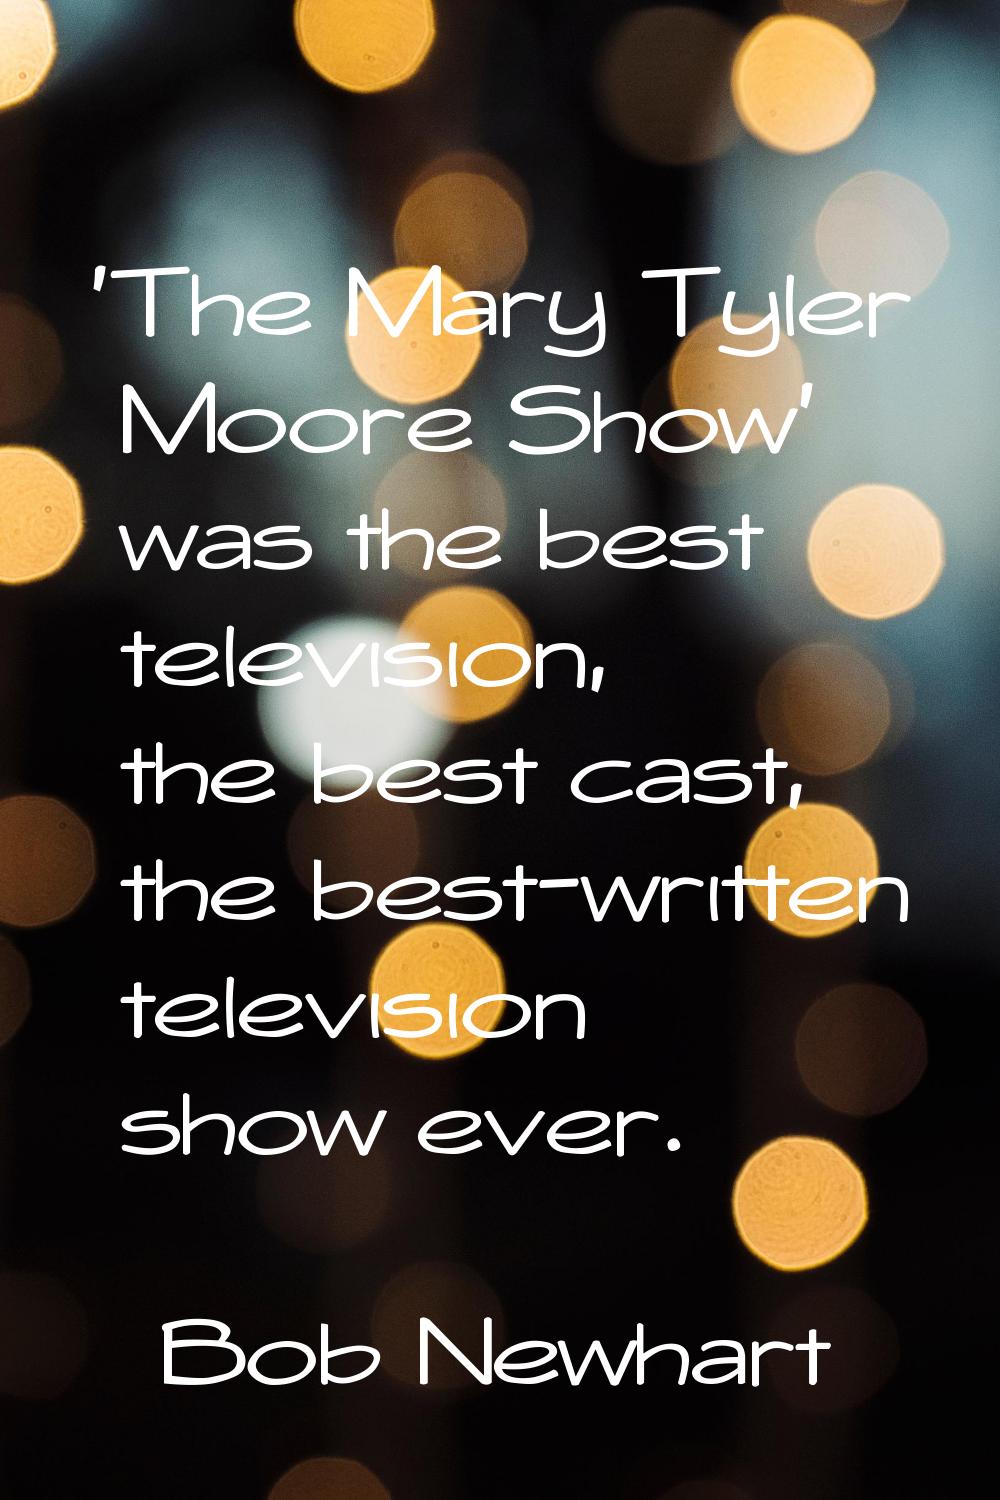 'The Mary Tyler Moore Show' was the best television, the best cast, the best-written television sho